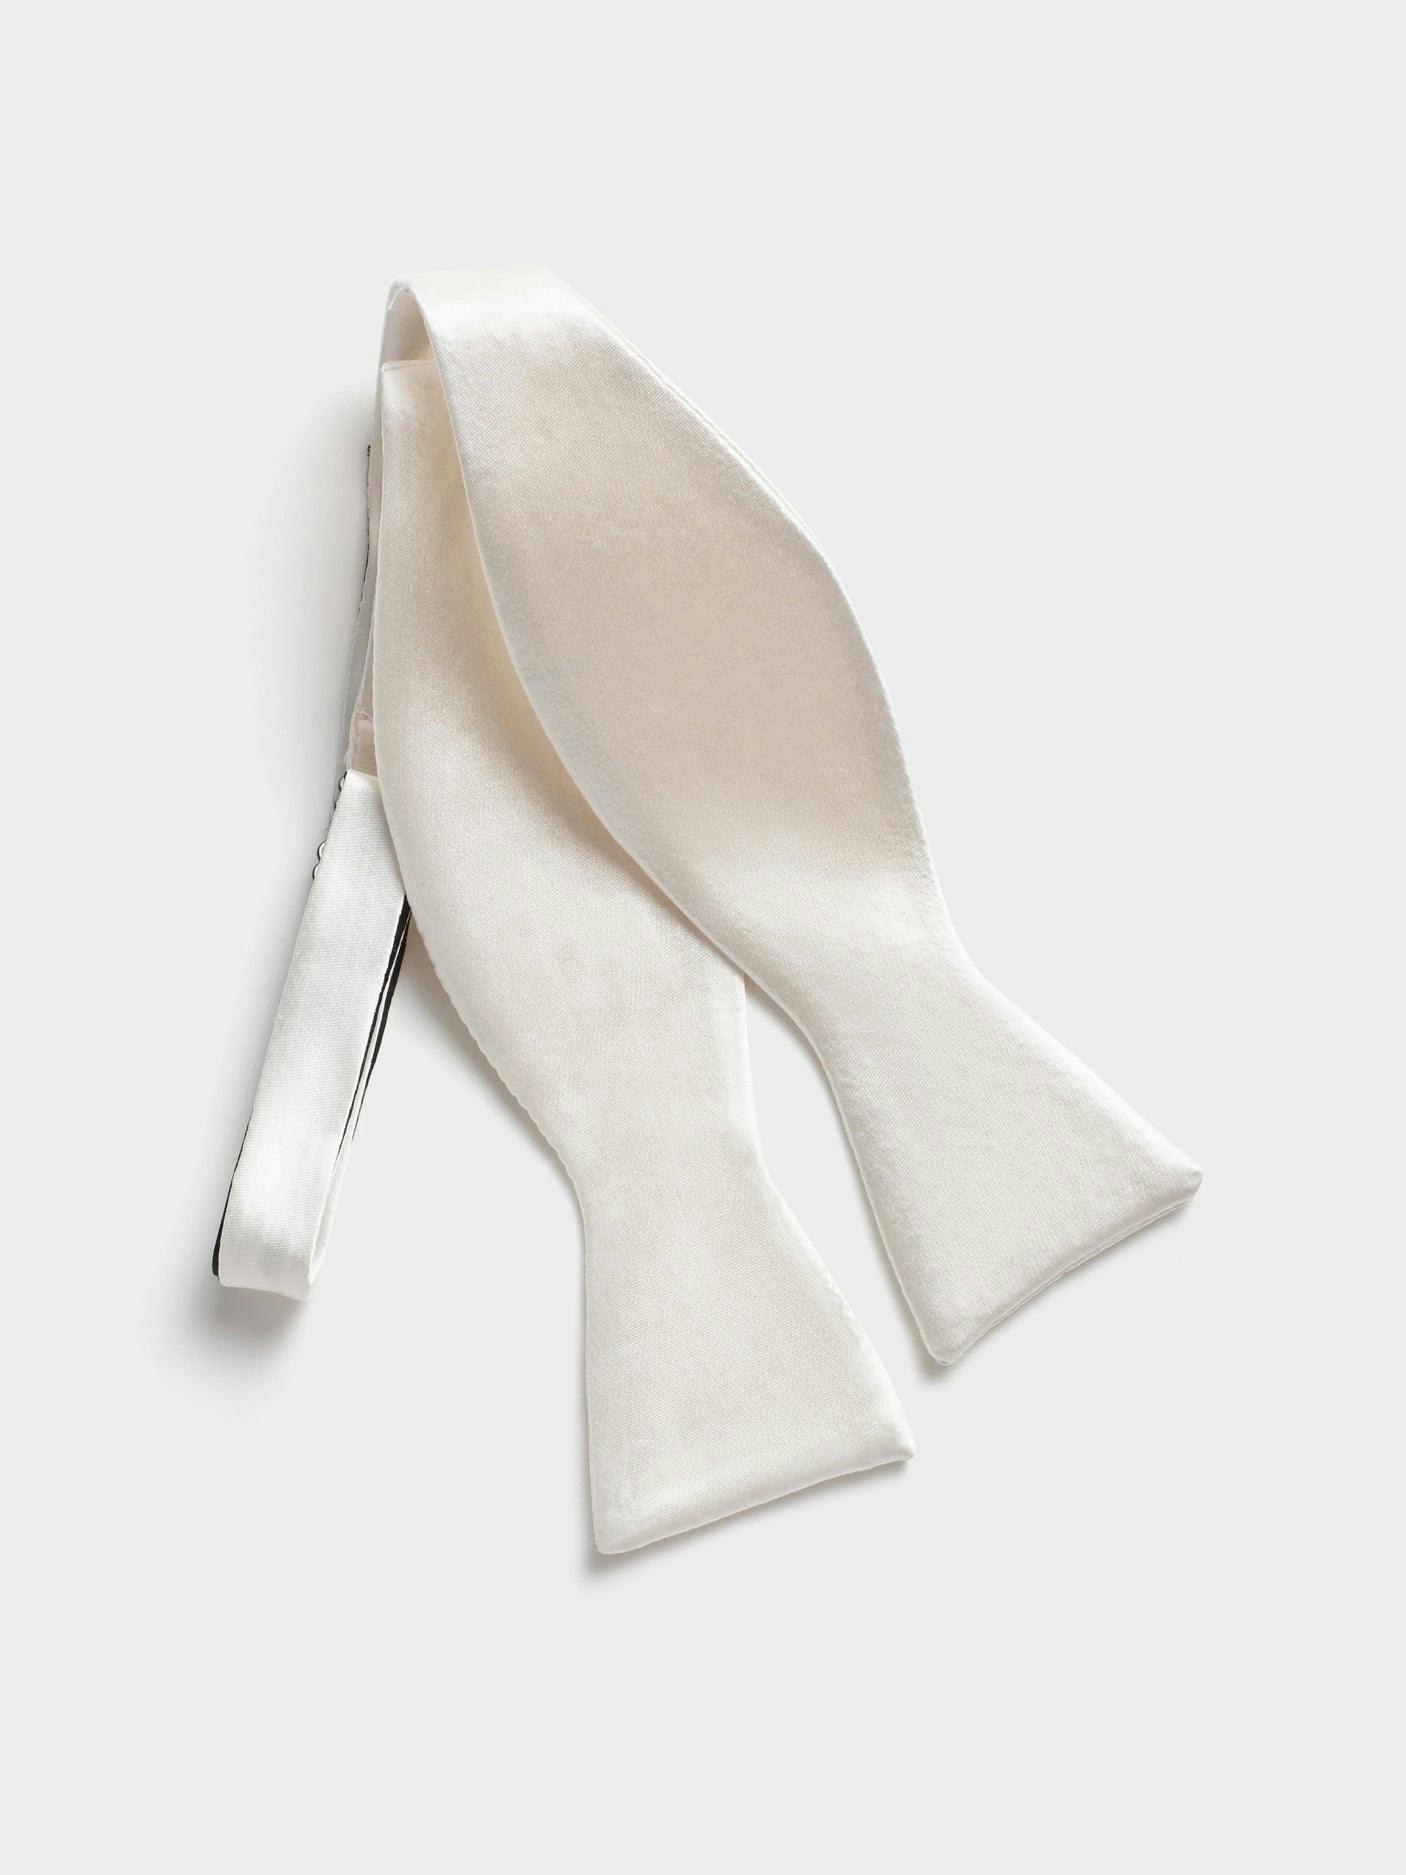 White Satin Butterfly Bow Tie